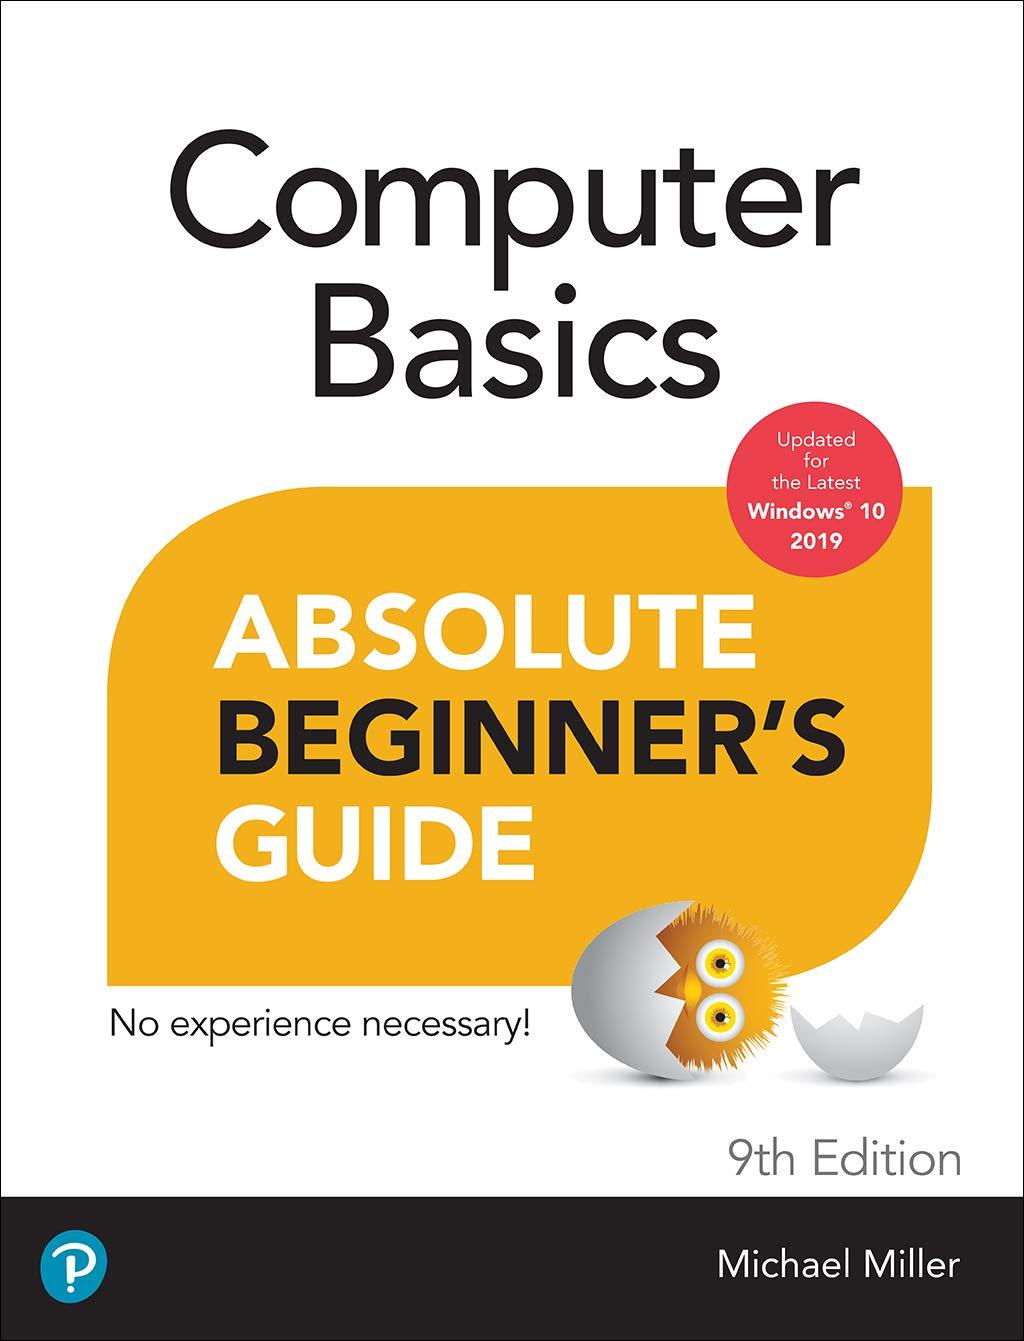 computer basics absolute beginner's guide 9th edition michael miller 0136498817, 978-0136498810